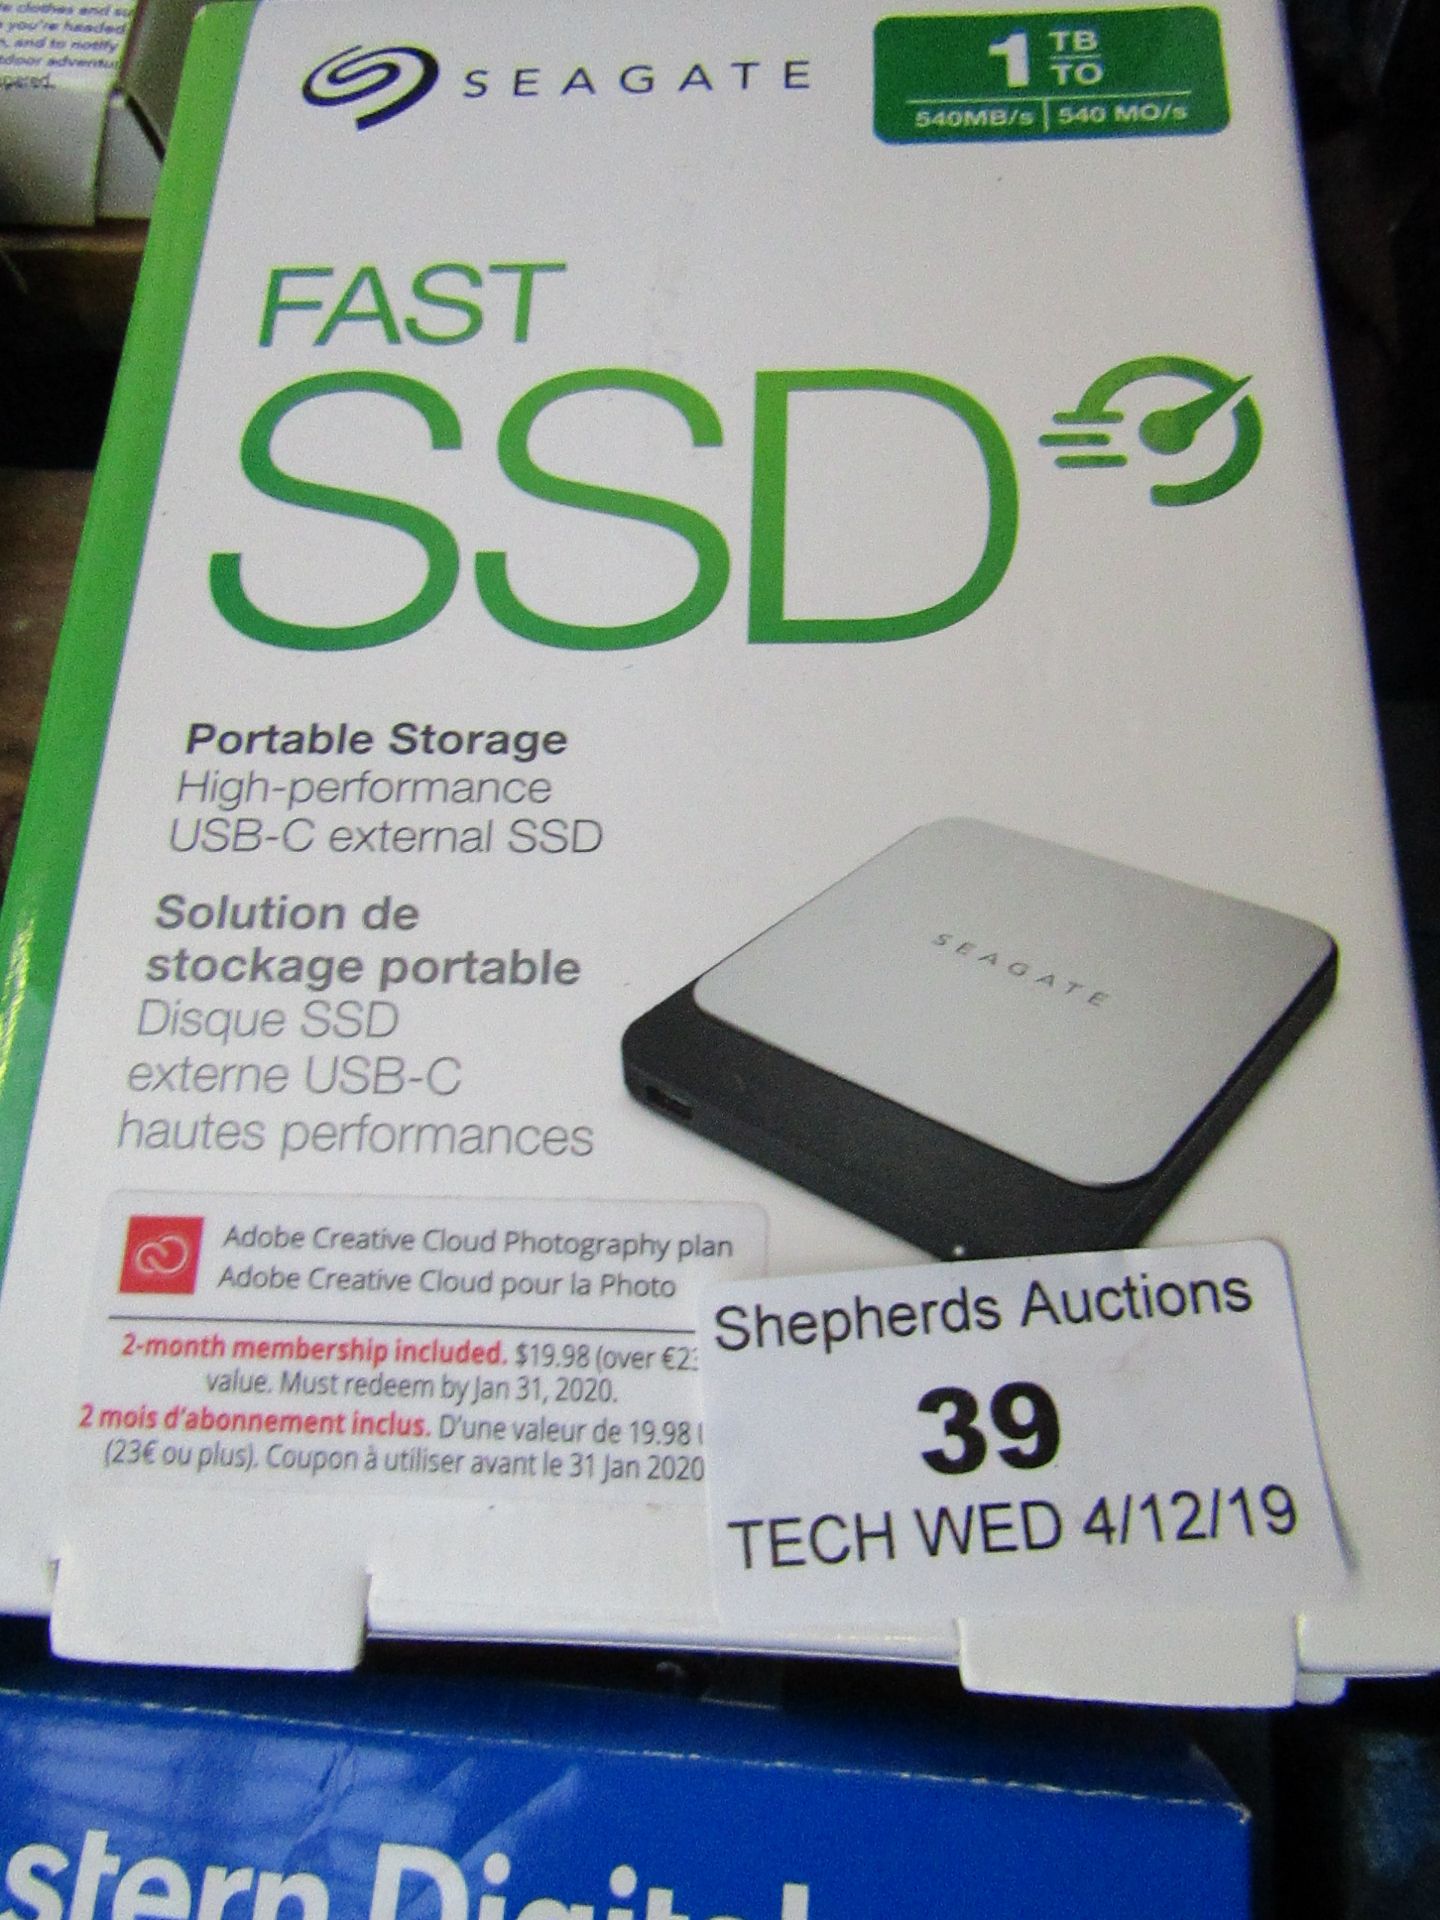 Seagate Fast 1TB SSD portable storage, boxed and unchecked.